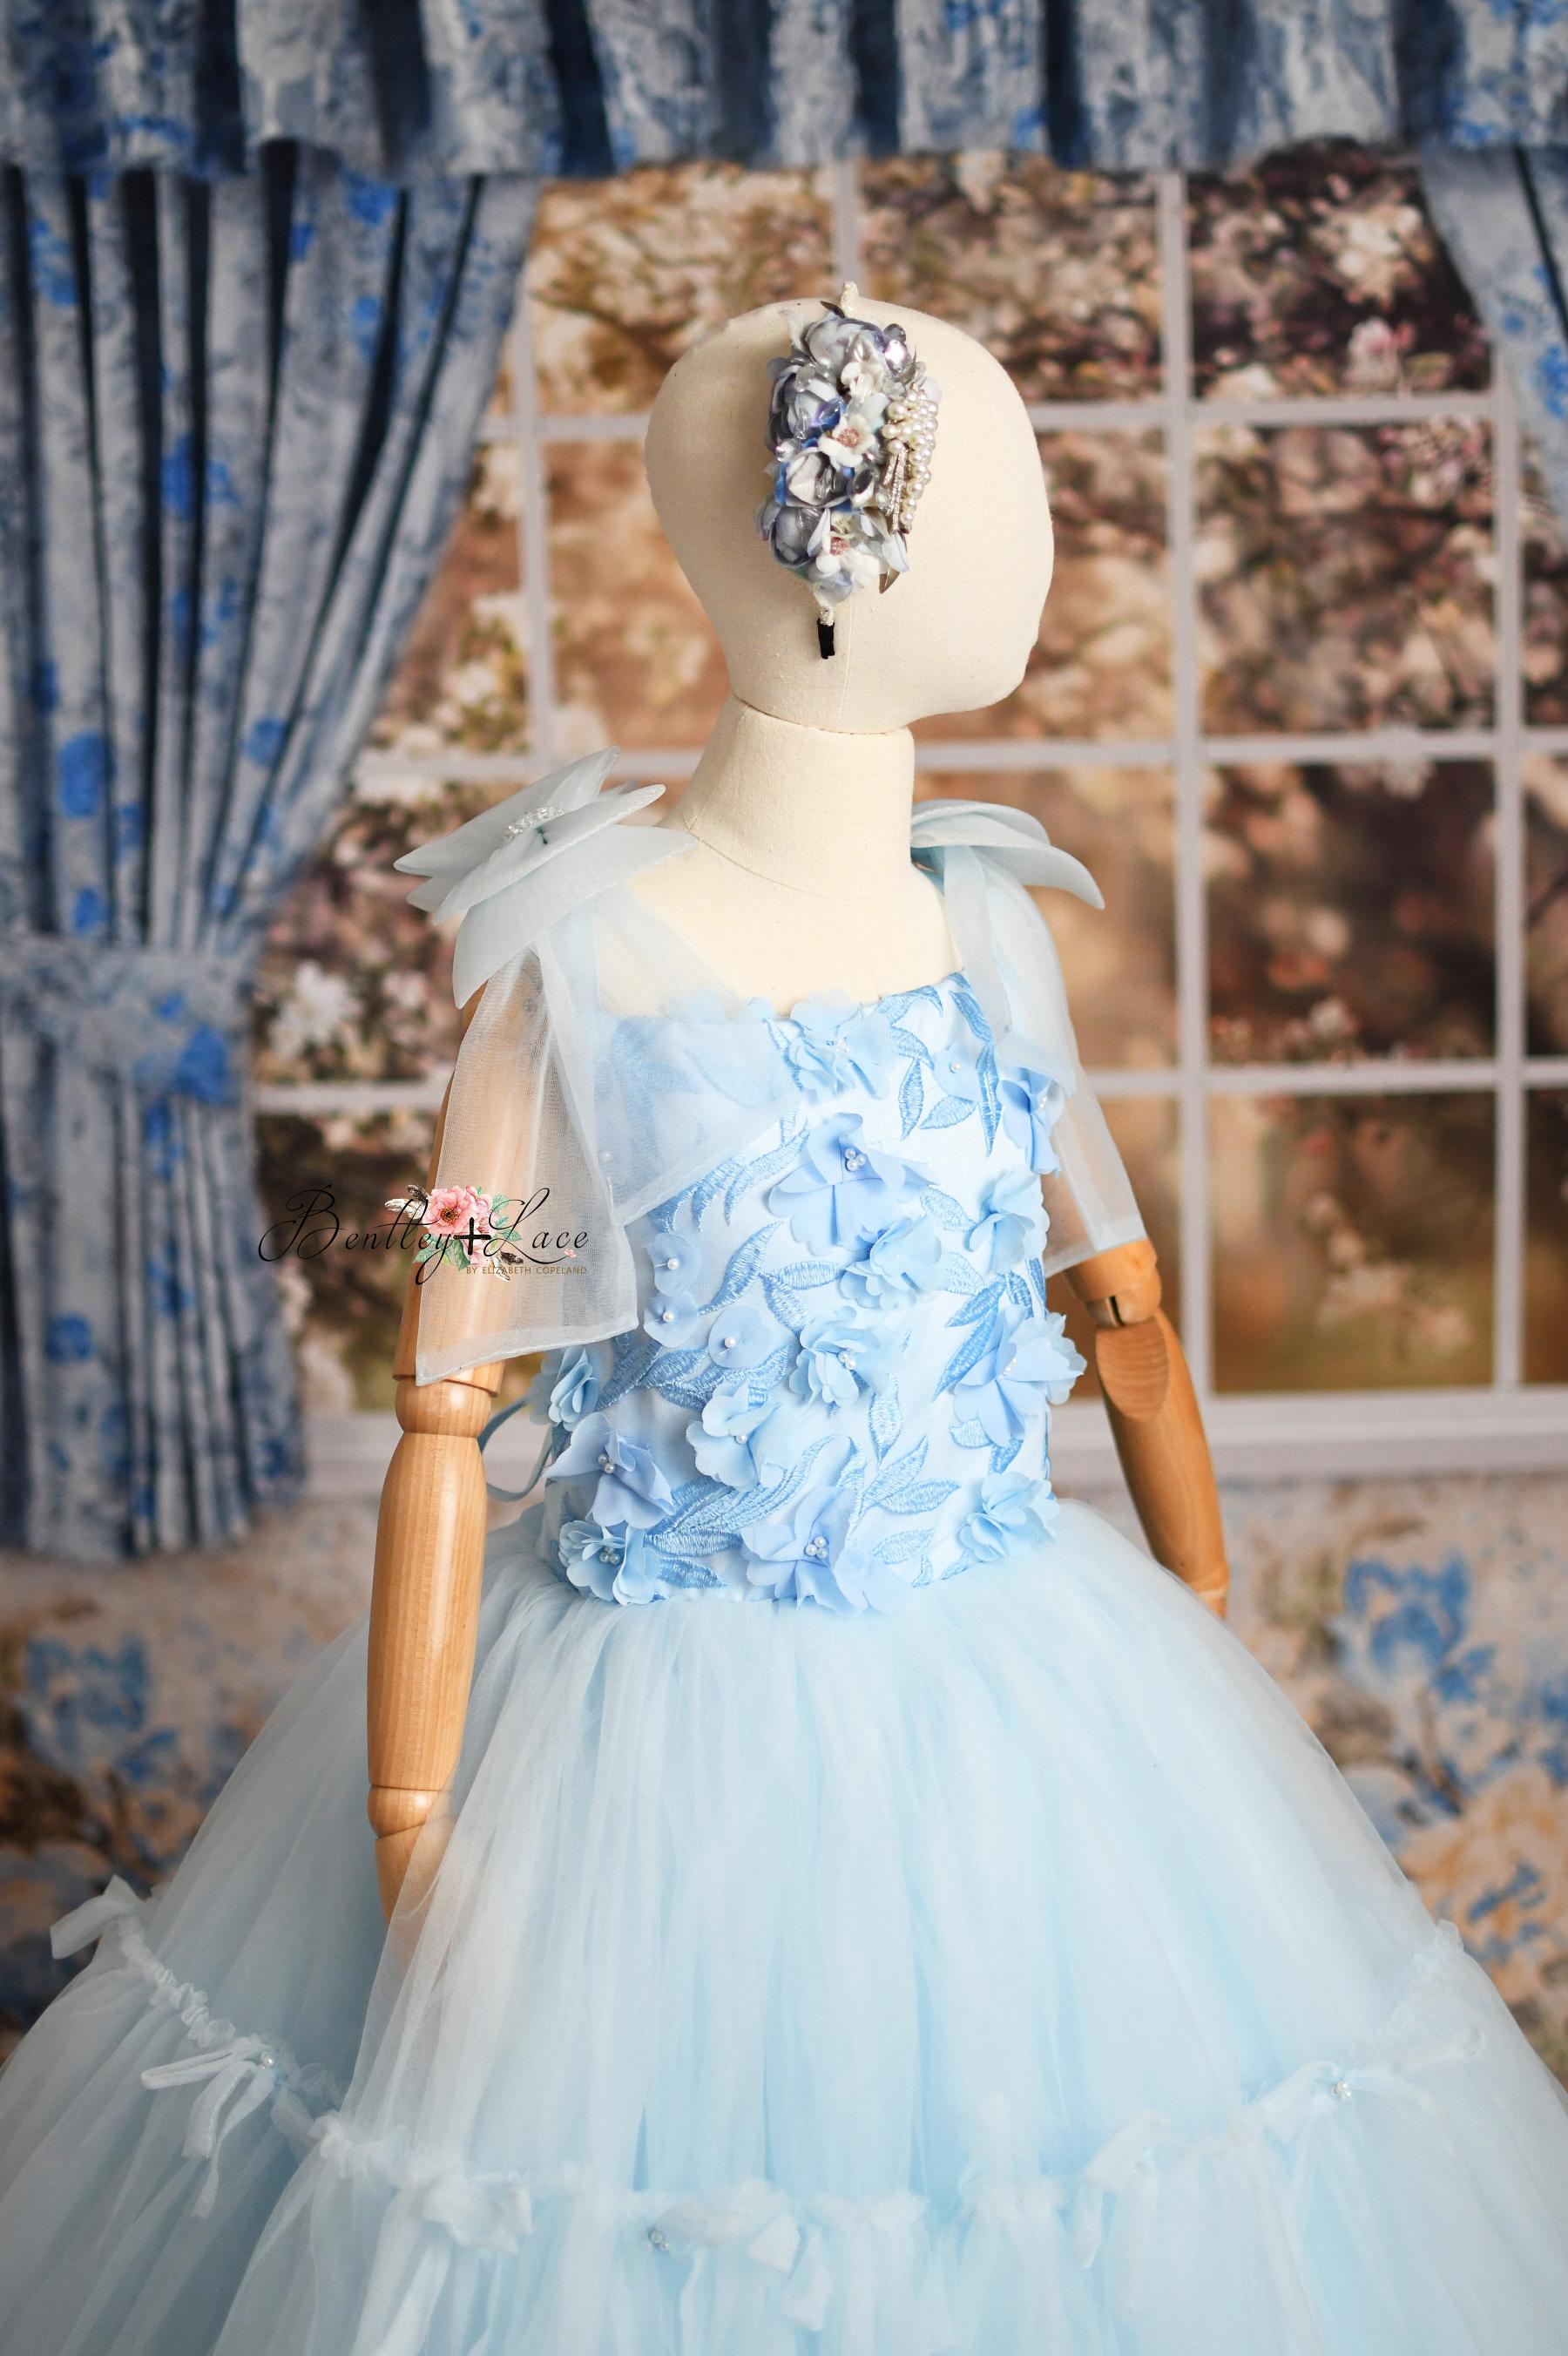 Cinderella inspired gowns for photography sessions